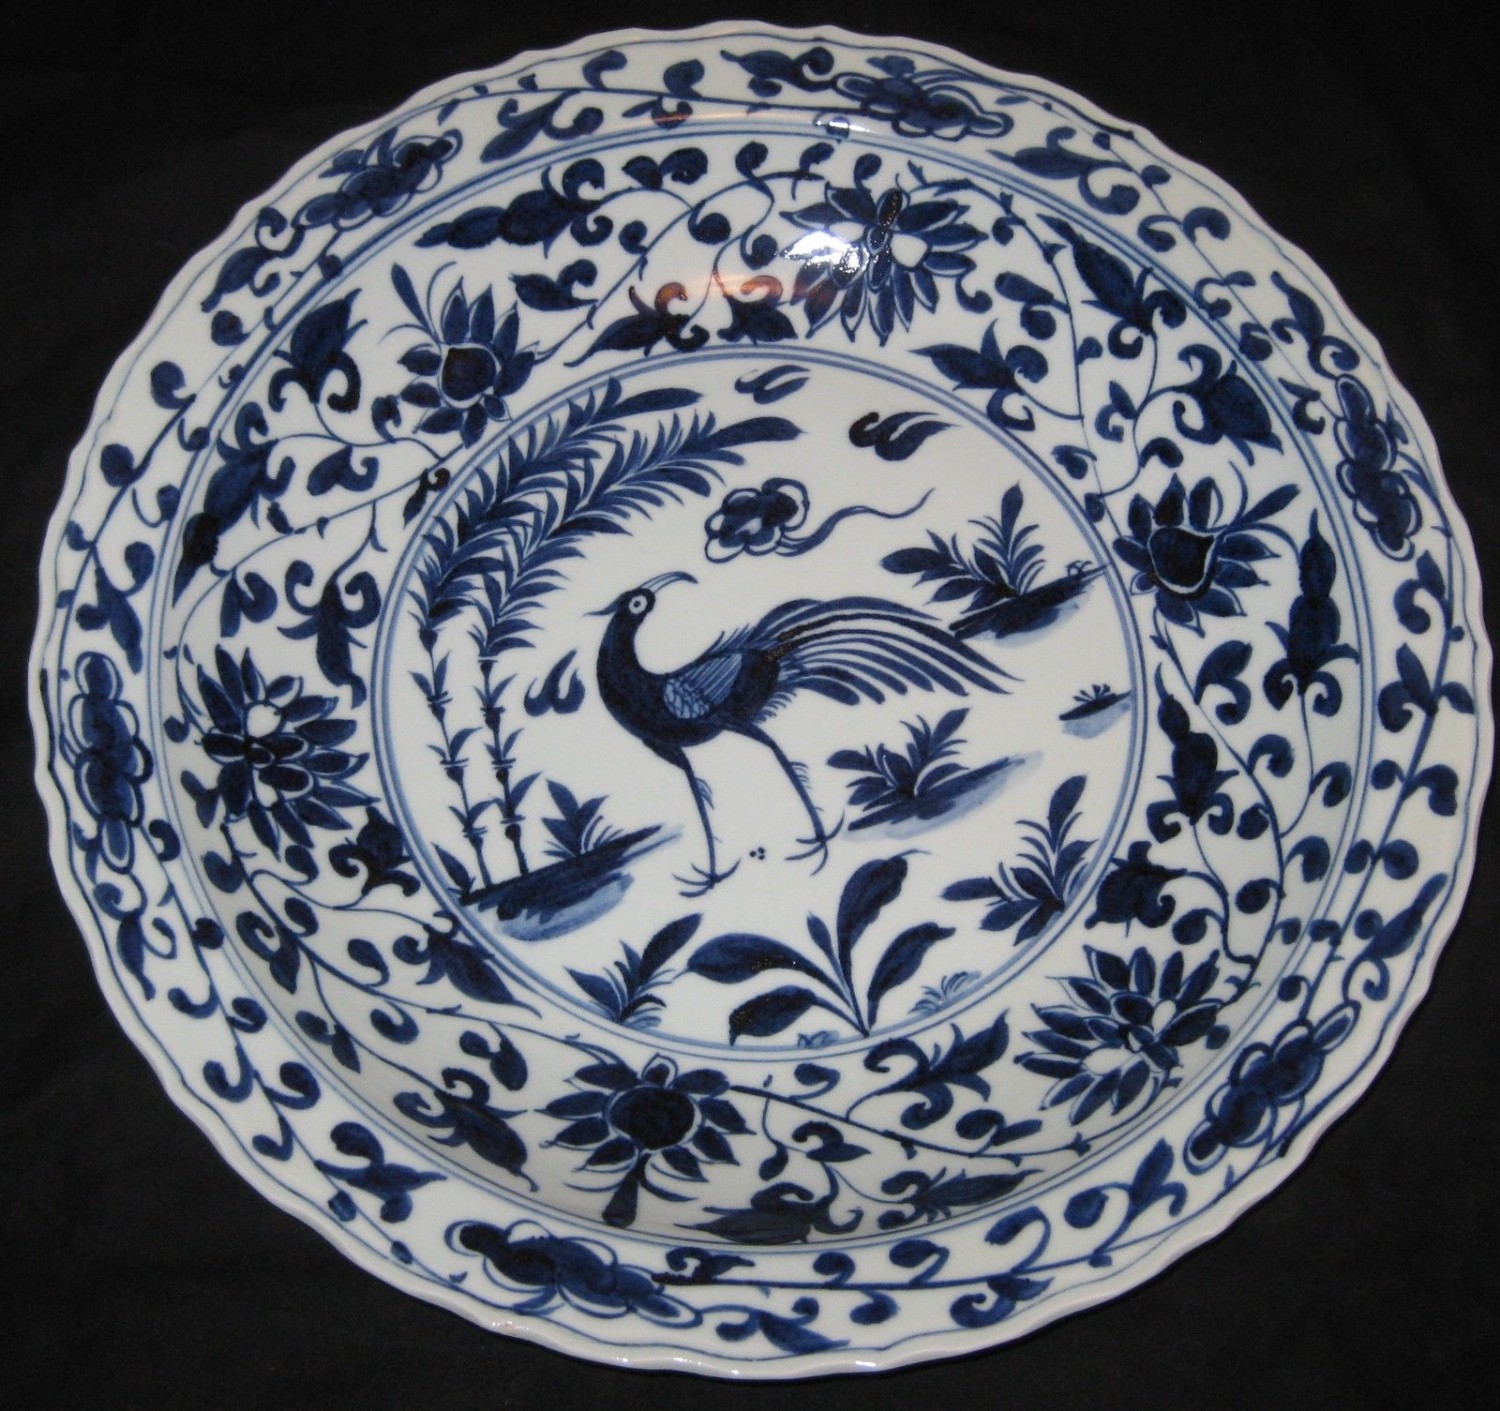 BIG CHINESE PORCELAIN BIRD&FLOWER, 44.5 CM B&W CHARGER, 19TH C,XUANDE MARK.